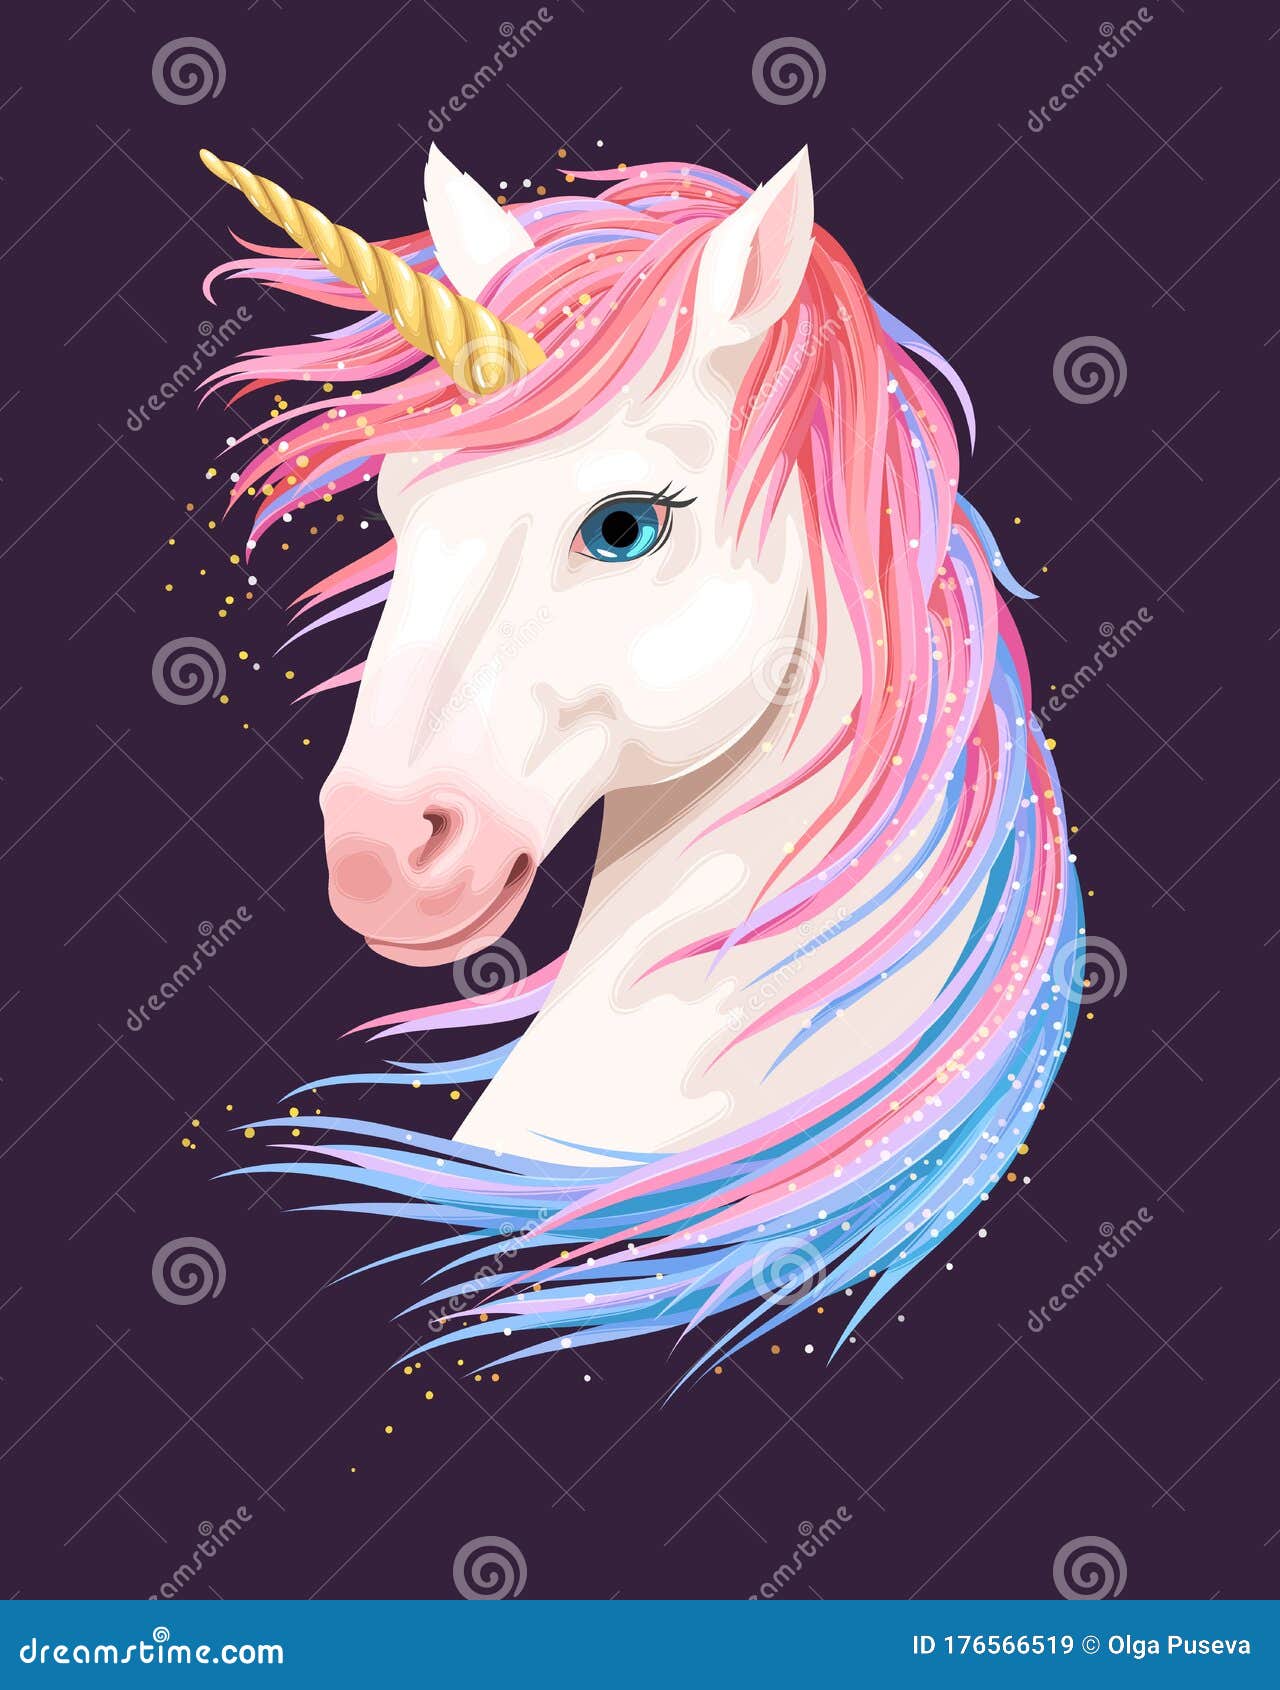 Vector Illustration of Cute Unicorn with Gold Horn Stock Vector ...